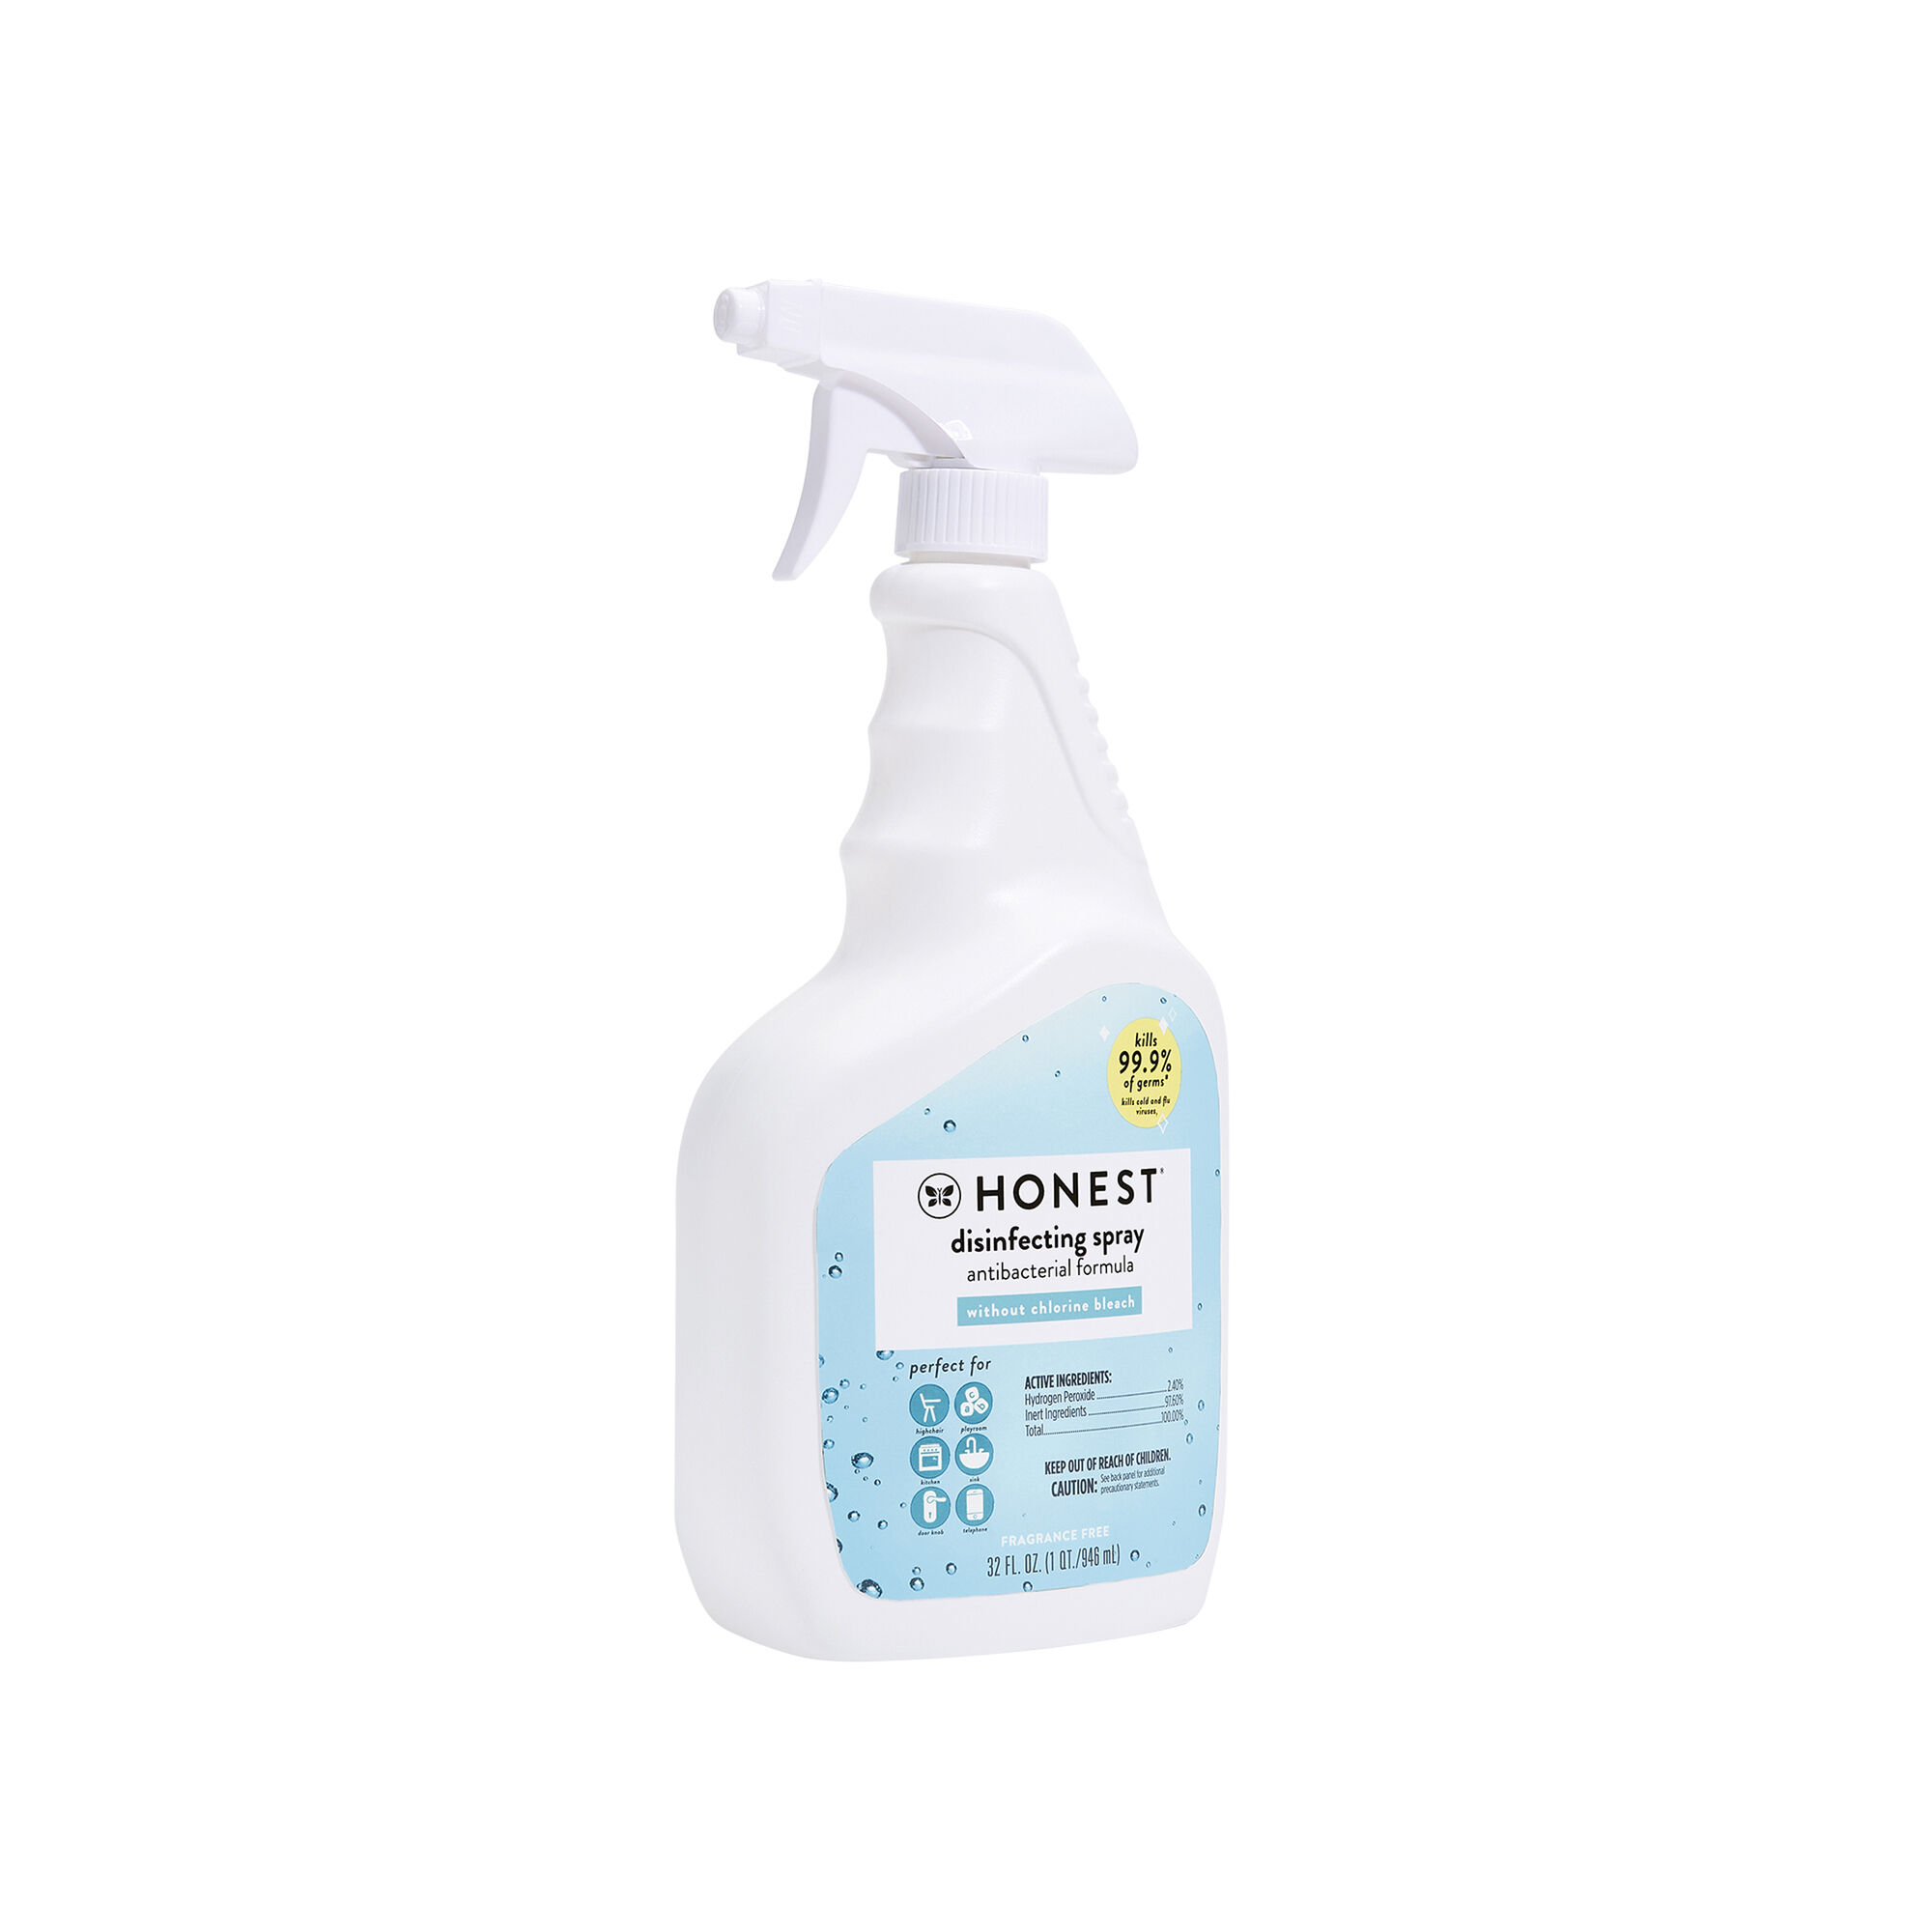 Hillyard, Q.TDisinfectant Cleaner, concentrated gallon, HIL0016706, 4  gallons per case, sold as 1 gallon